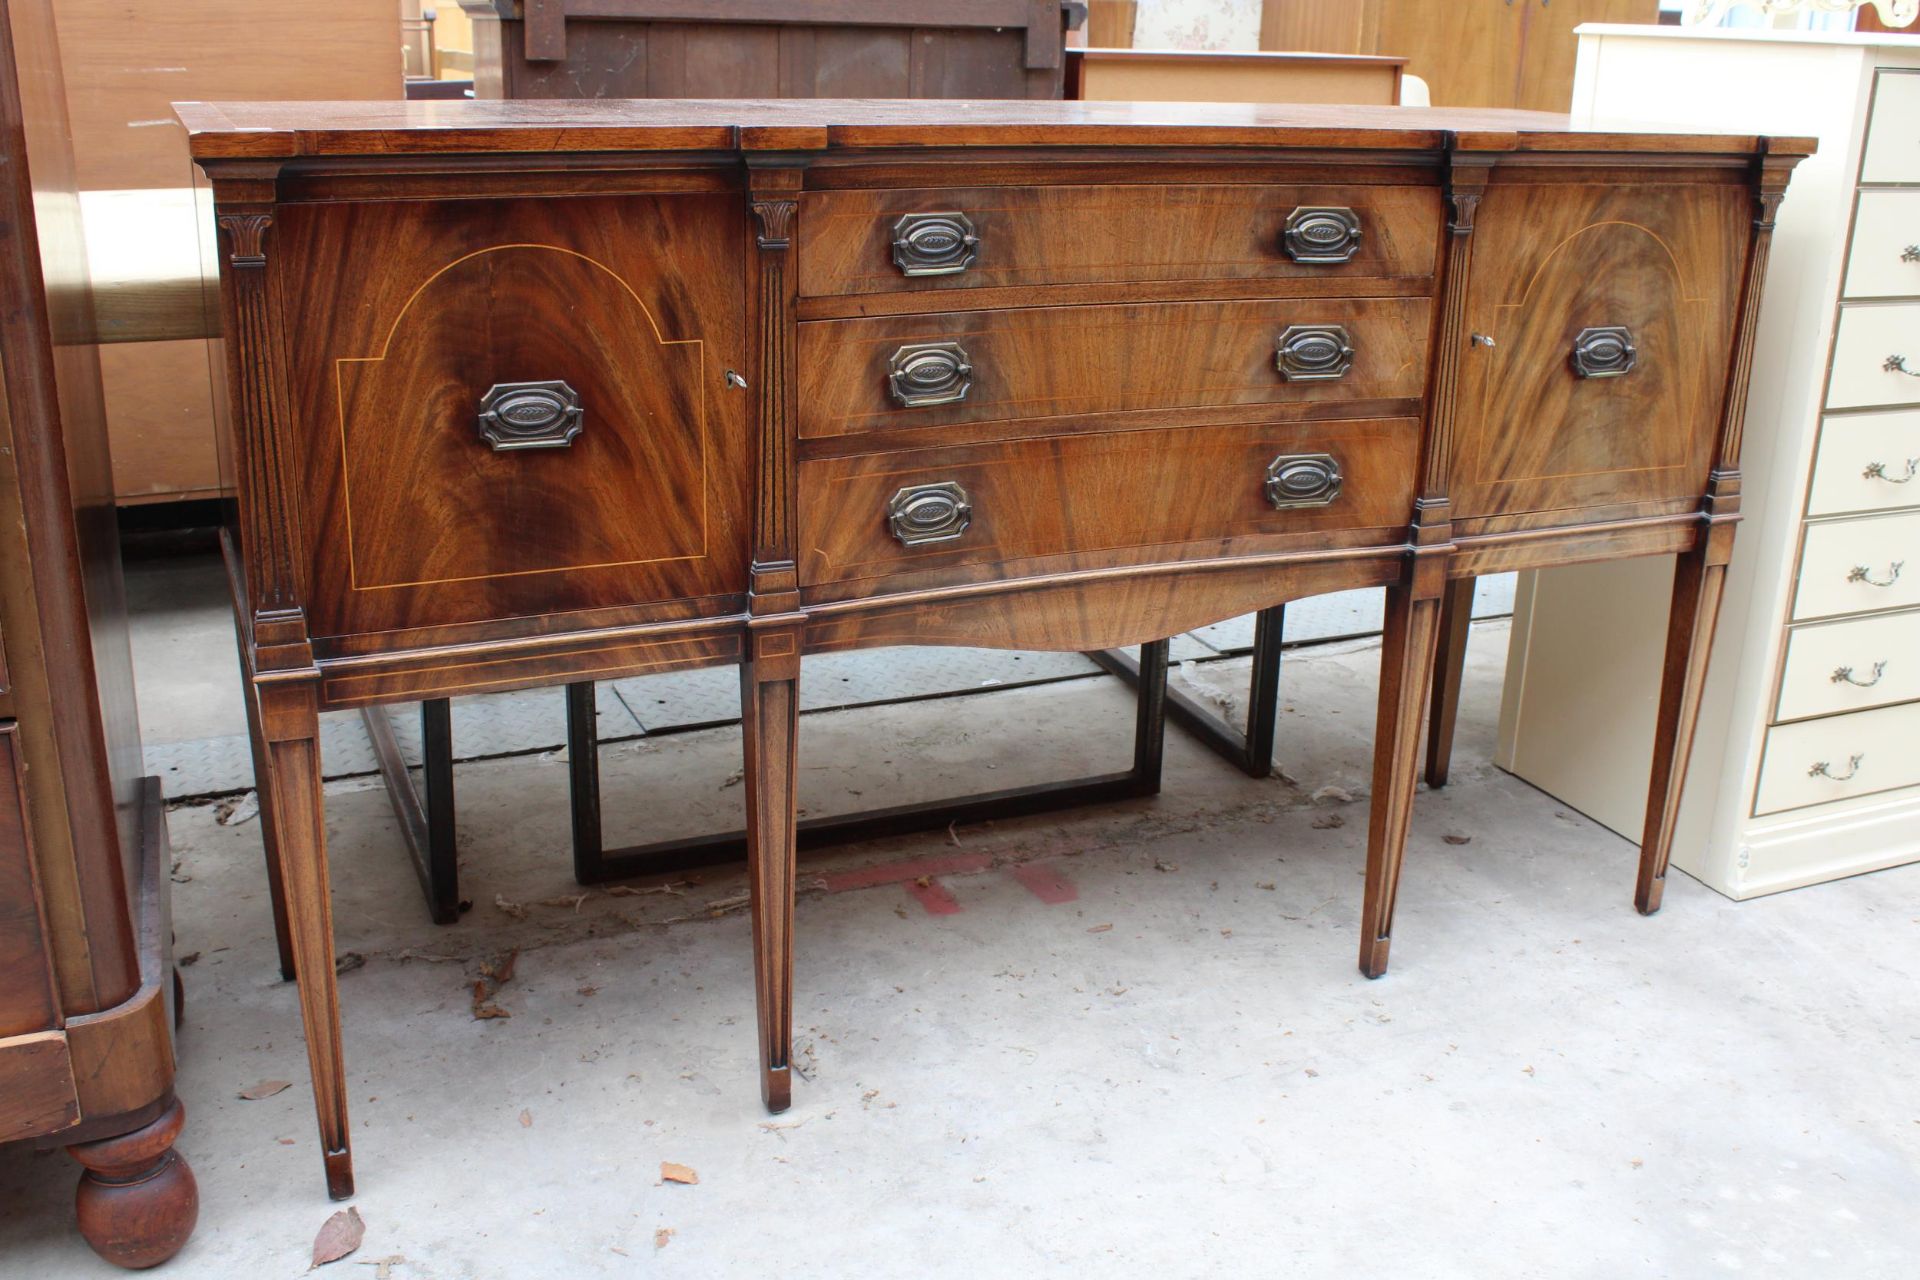 A REGENCY STYLE, MAHOGANY CROSSBANDED AND INLAID SIDEBOARD ON TAPERING LEGS, 63" WIDE - Image 2 of 8